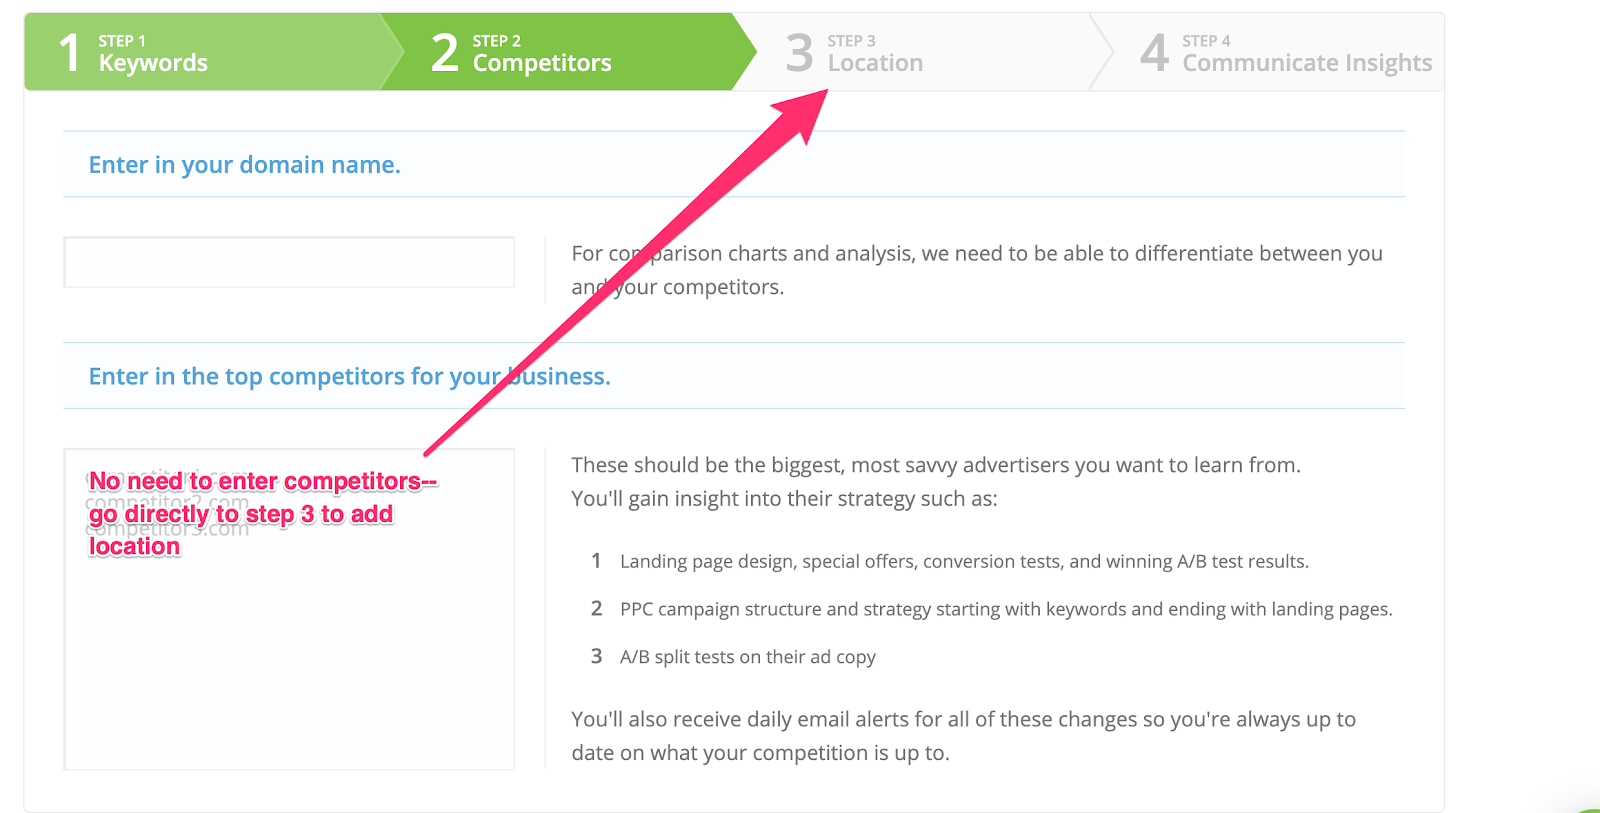 Create Campaign Watch Project: skip step 2 - no need to enter competitors.